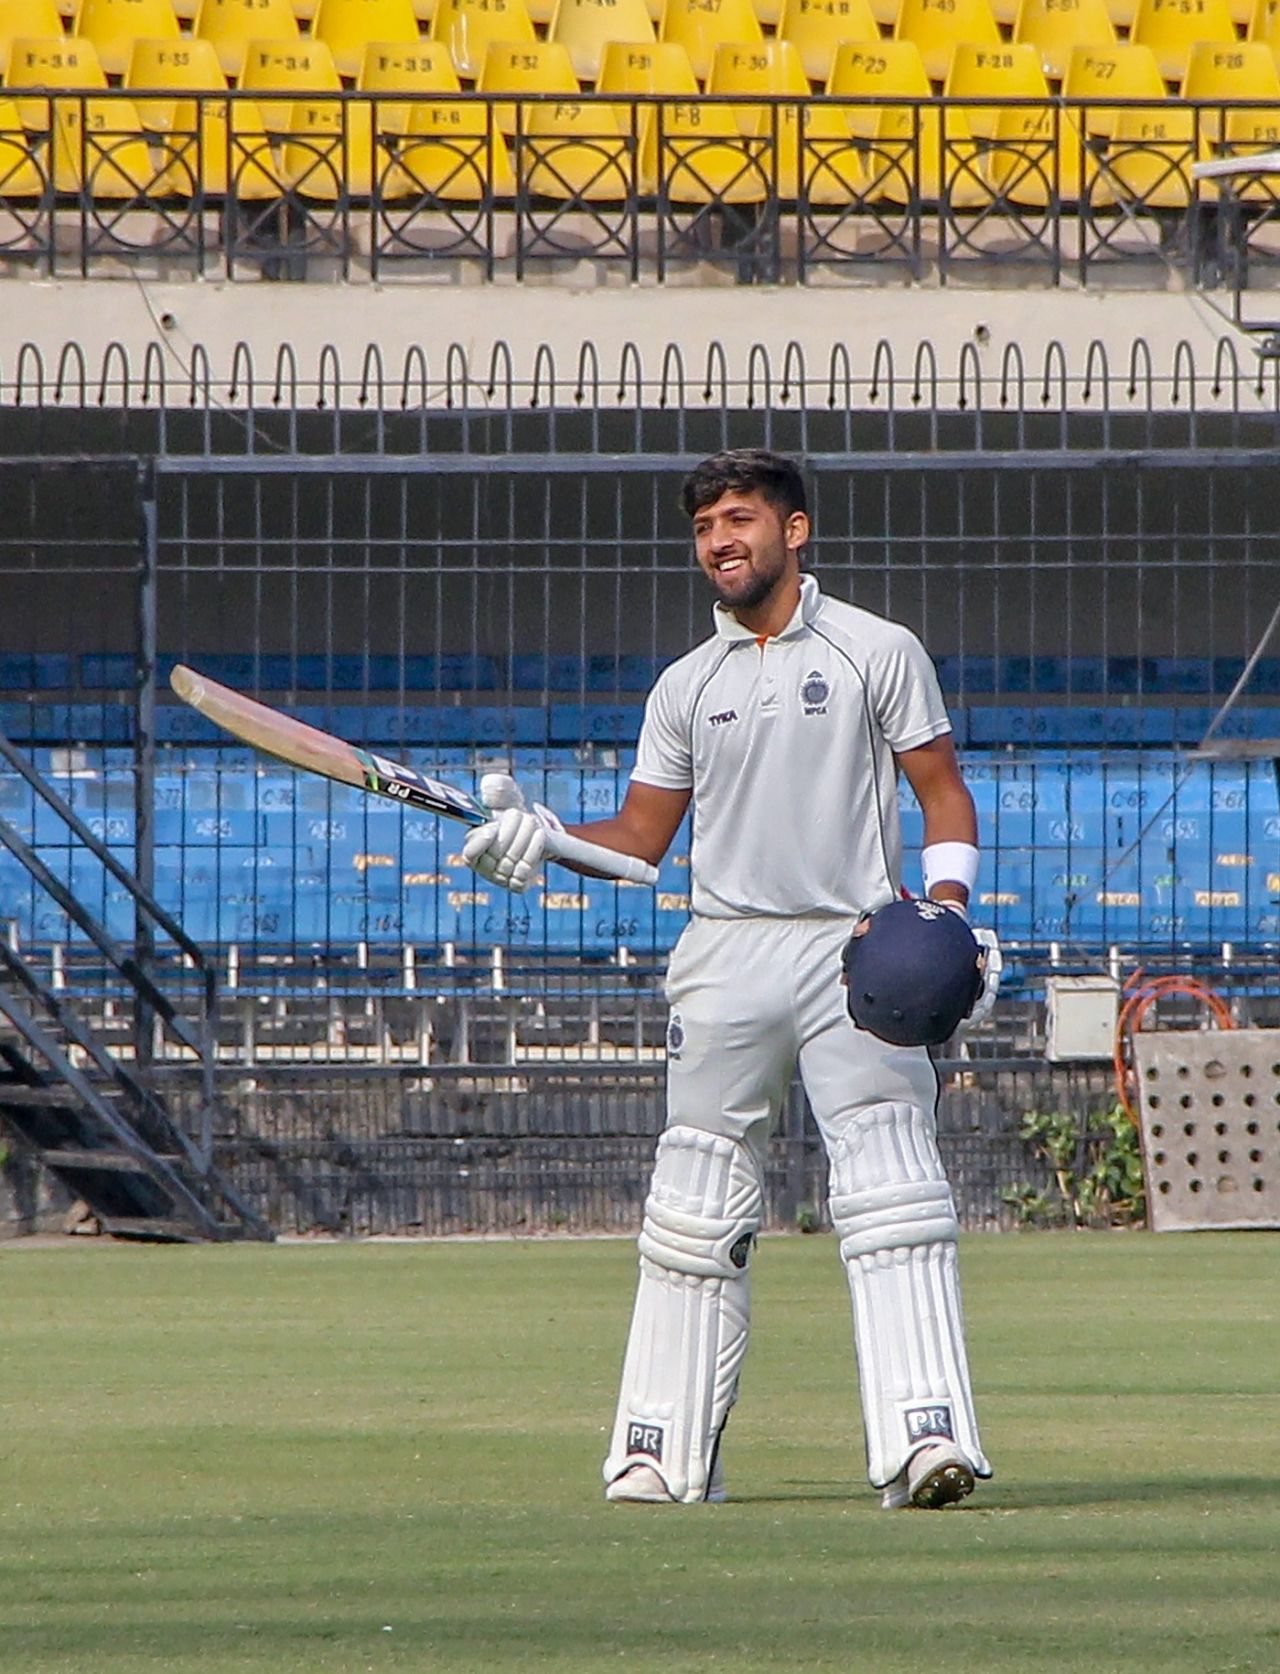 Ajay Rohera acknowledges the applause after hitting 267* on debut, Madhya Pradesh v Hyderabad, Ranji Trophy 2018-19, Day 3, December 8, 2018